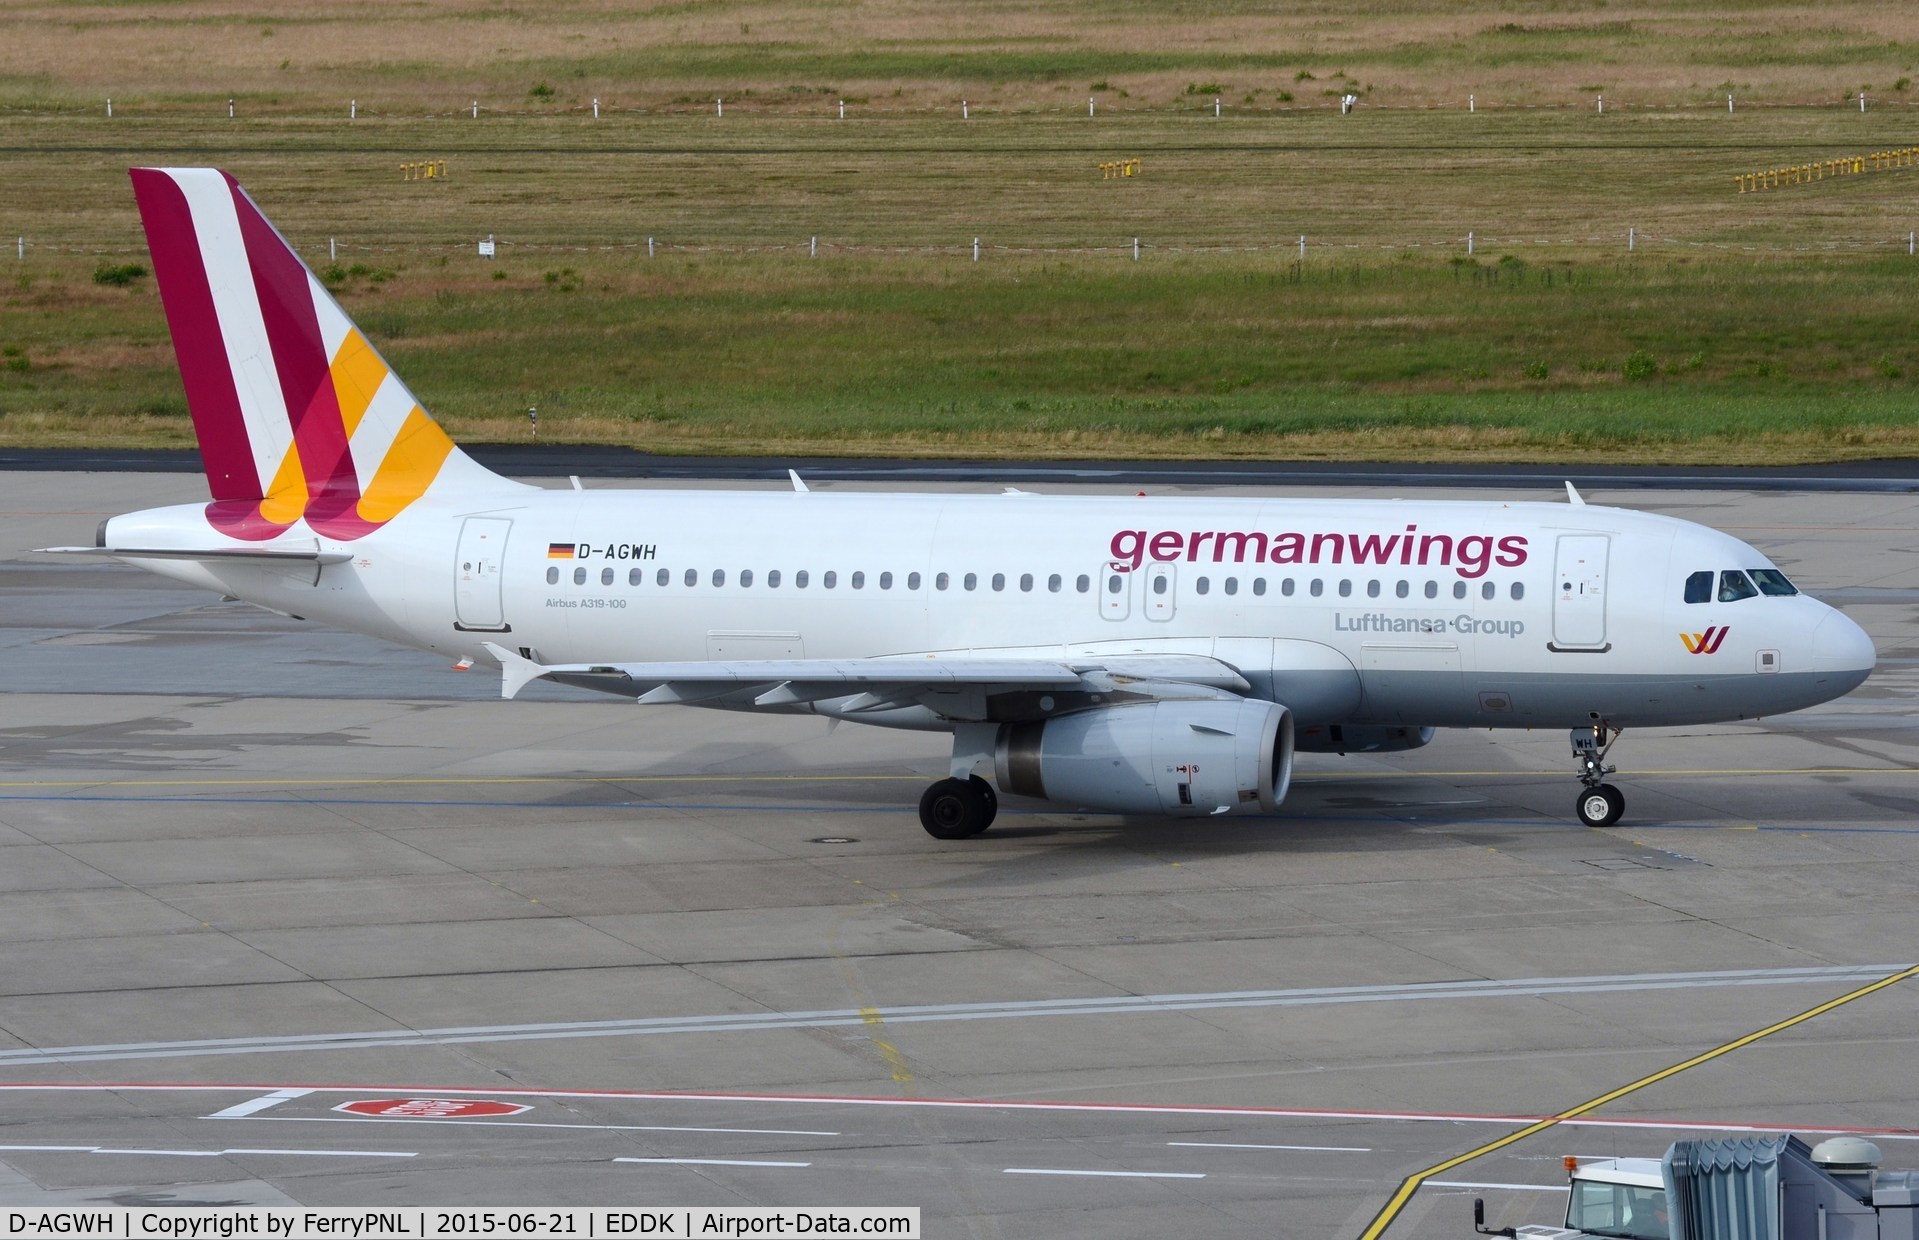 D-AGWH, 2007 Airbus A319-132 C/N 3352, Germanwings A319 taxying out.